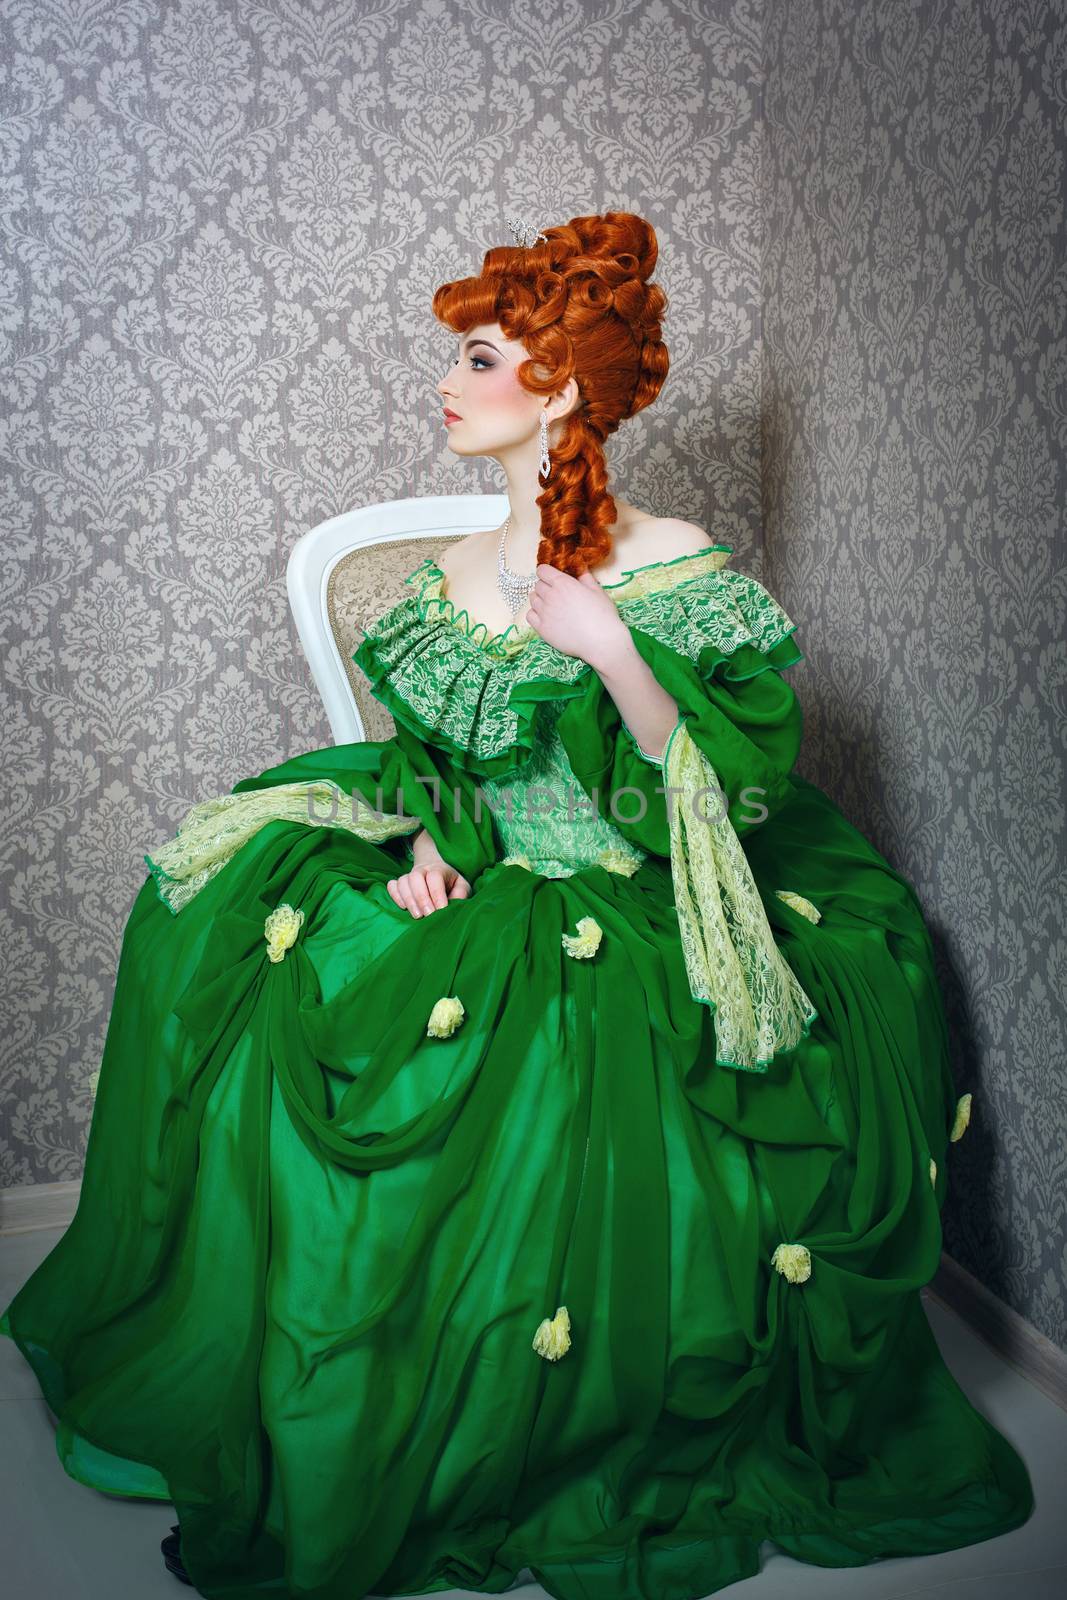 Princess in magnificent green dress by Vagengeym